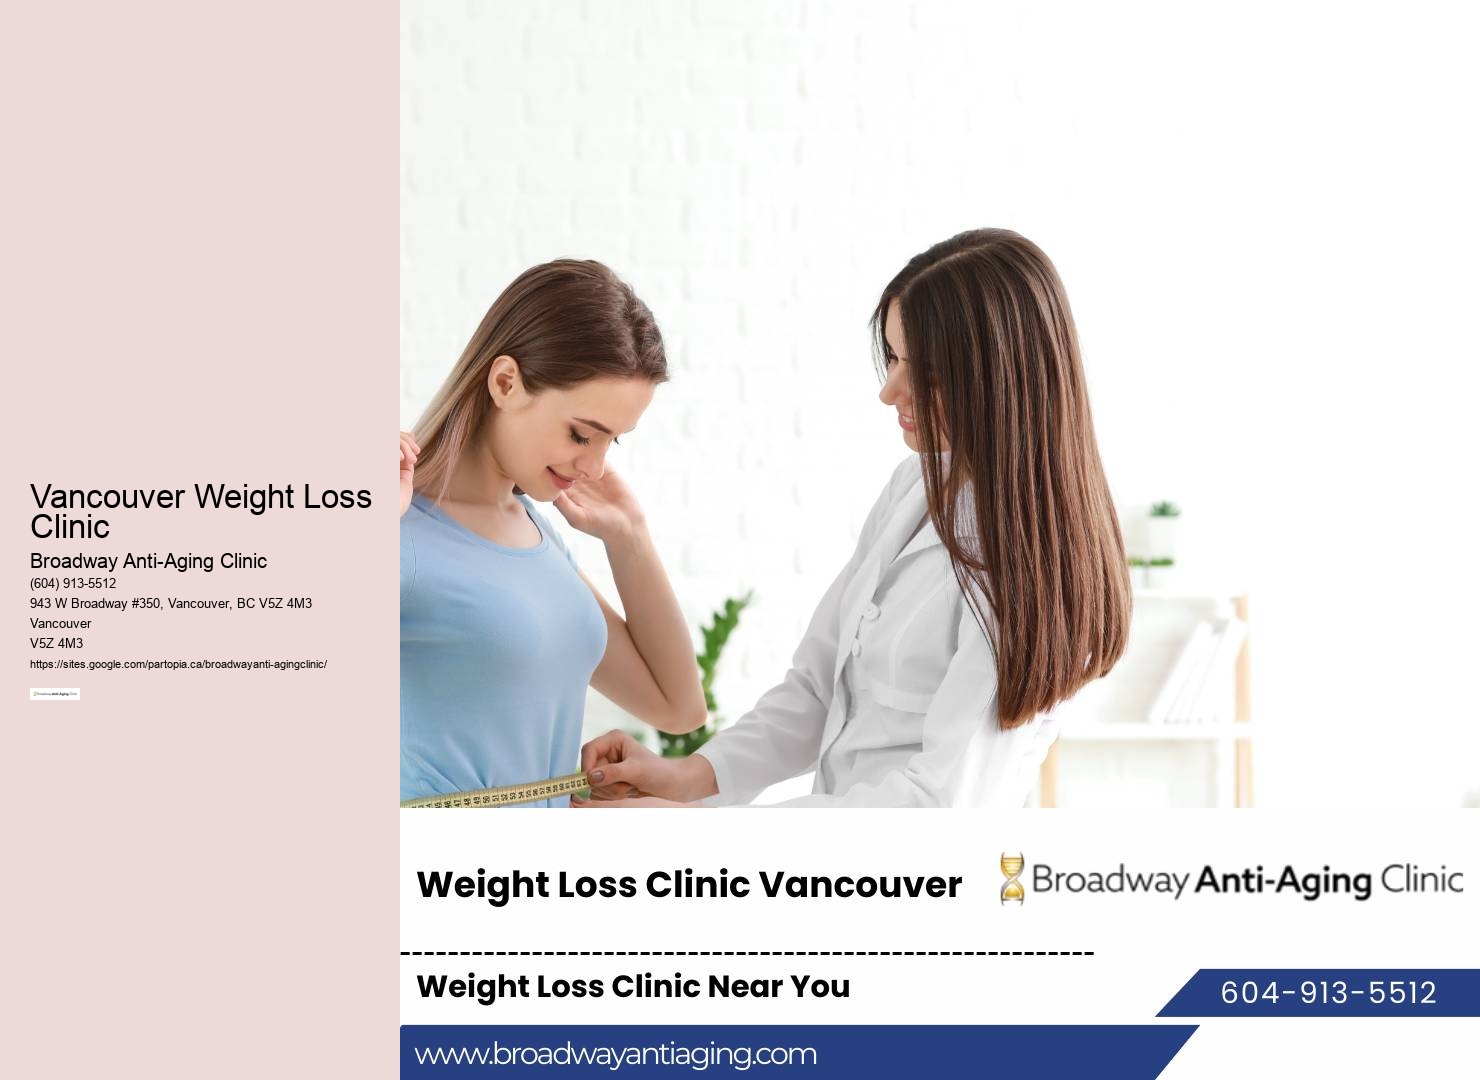 Vancouver Weight Loss Clinic